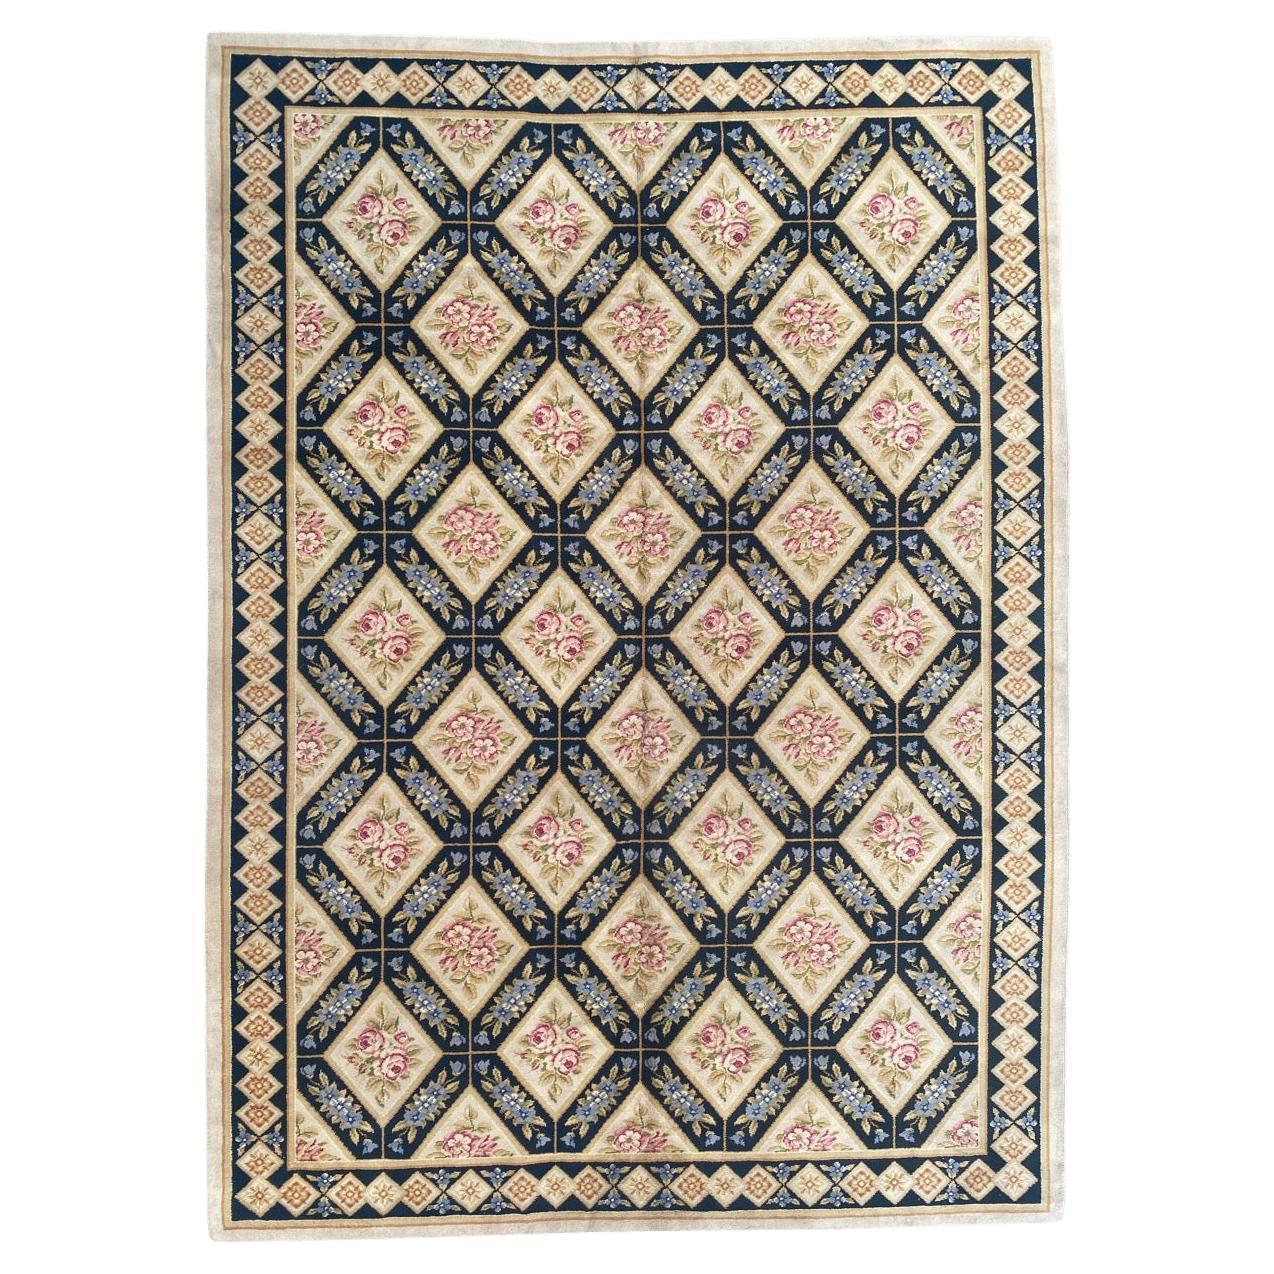 Aubusson Russian and Scandinavian Rugs